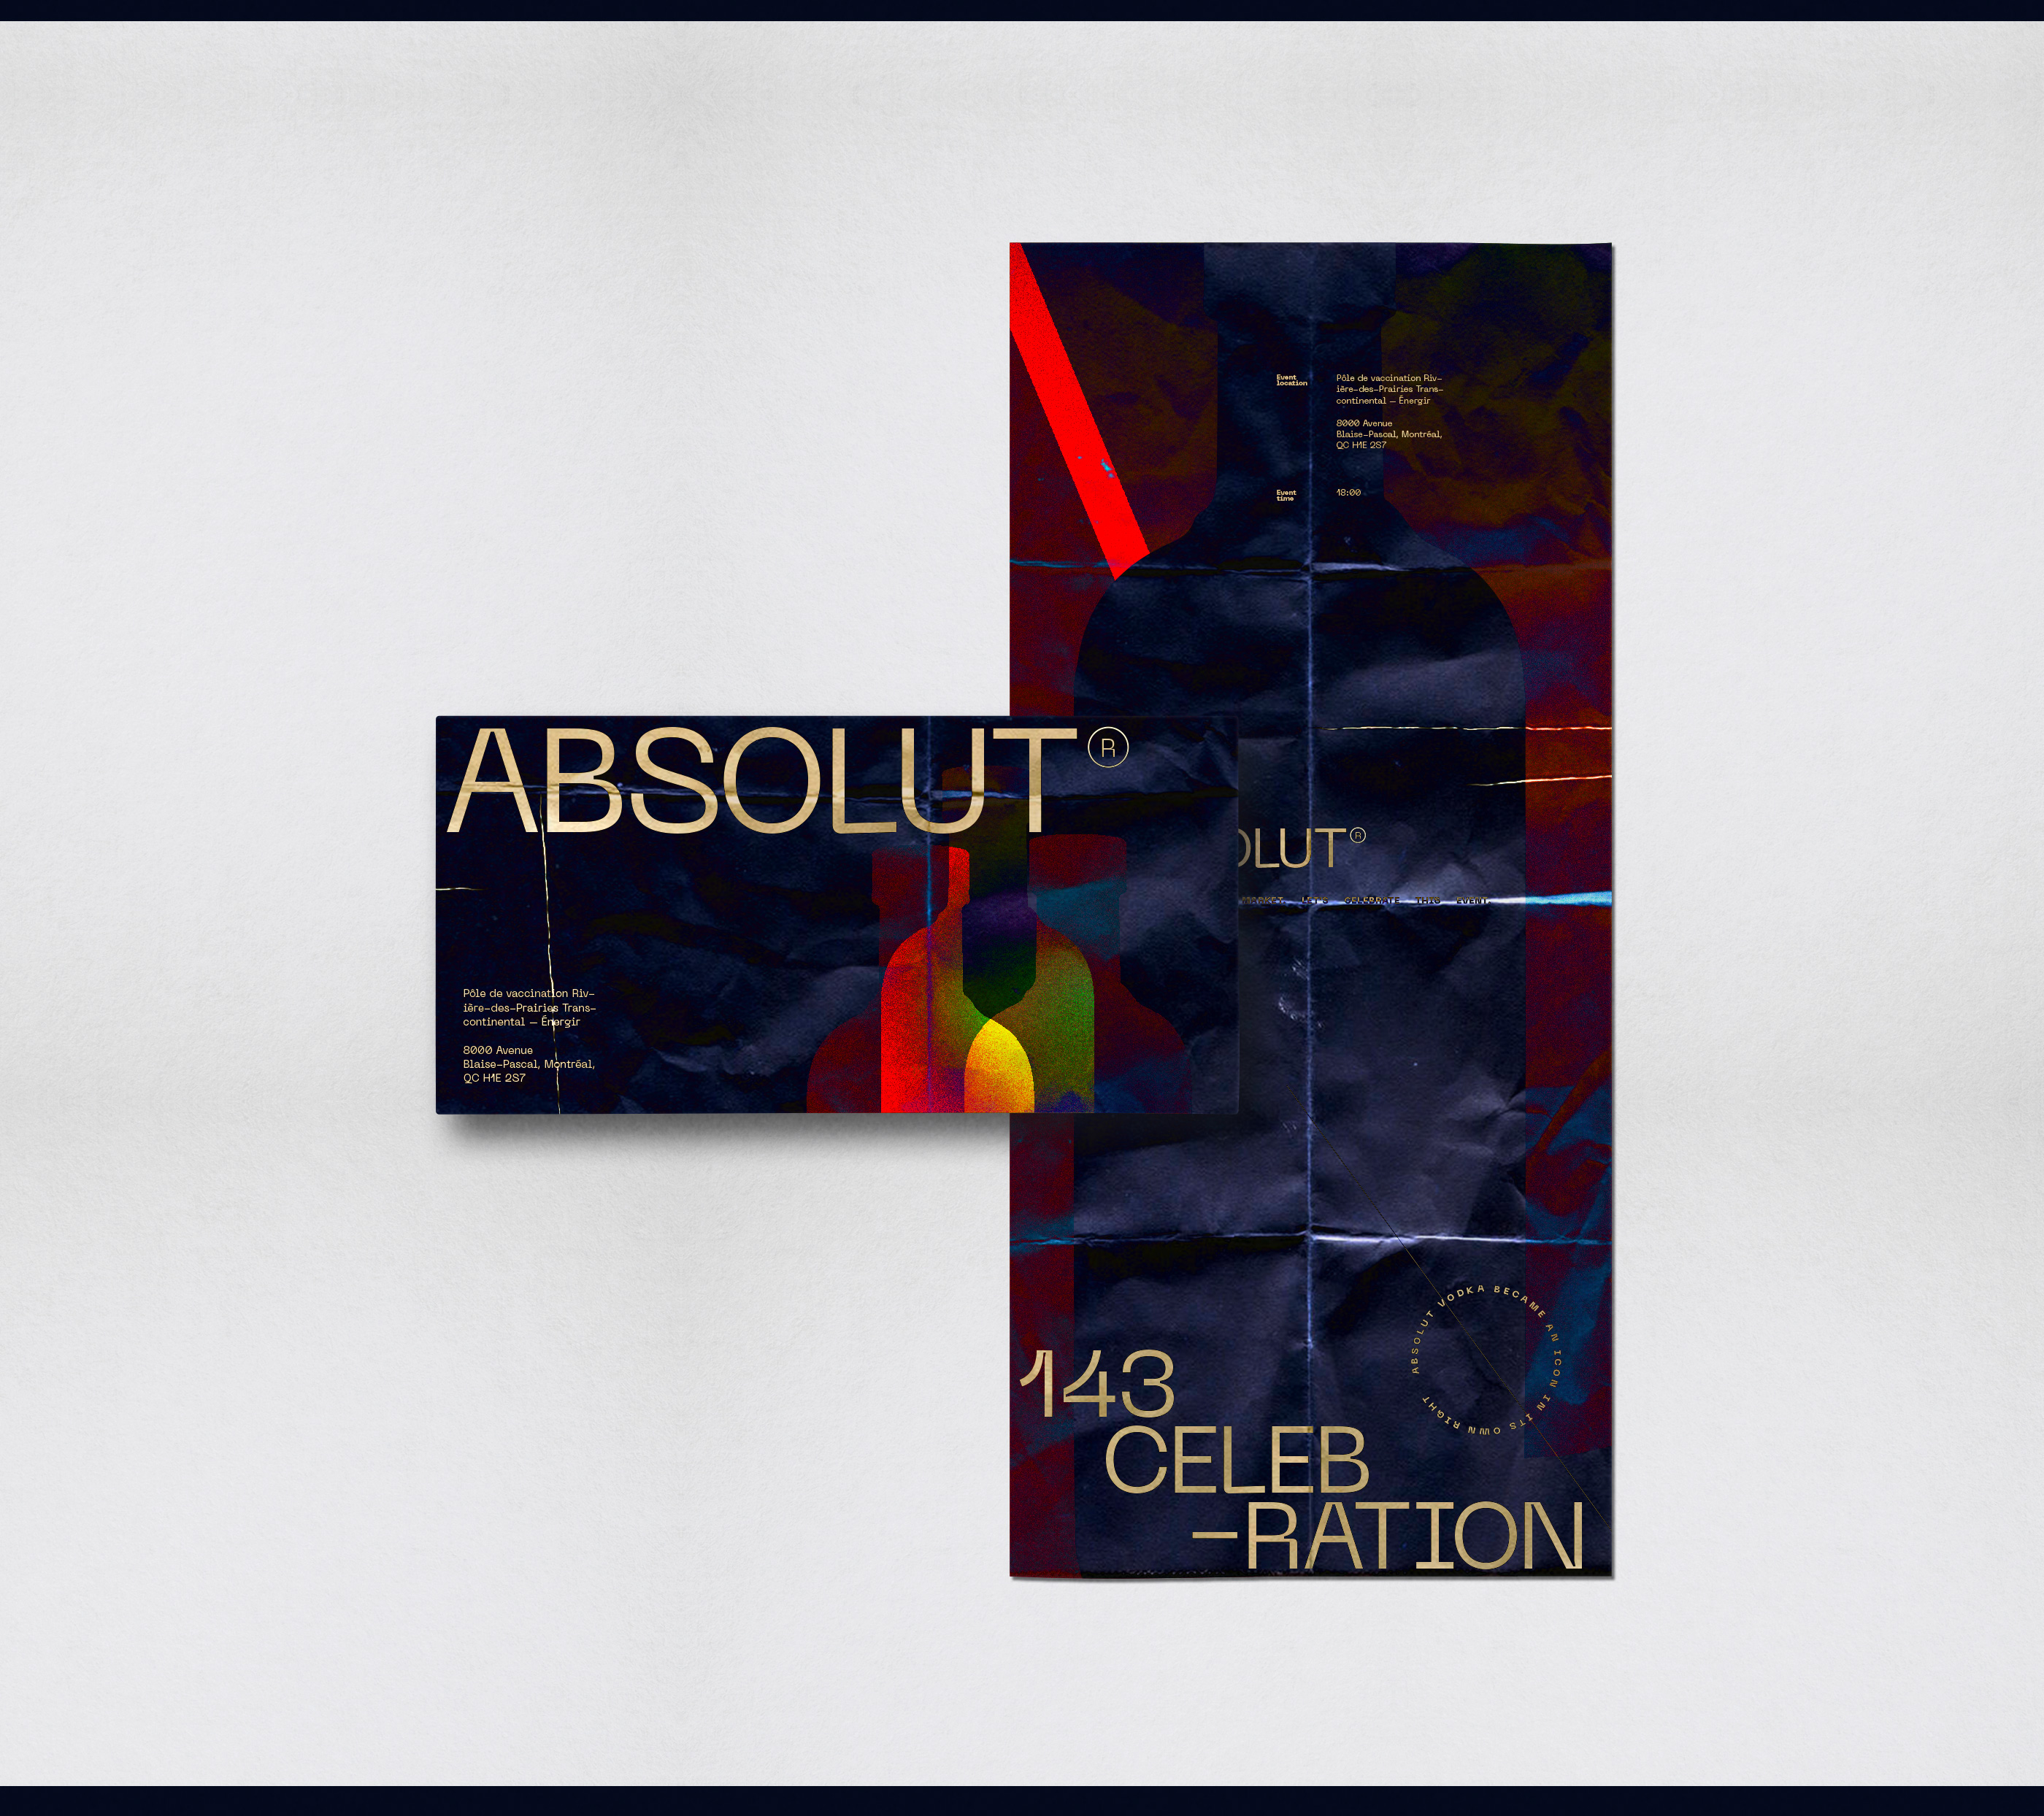 The current work includes print materials for the Vodka Absolut 143 event.